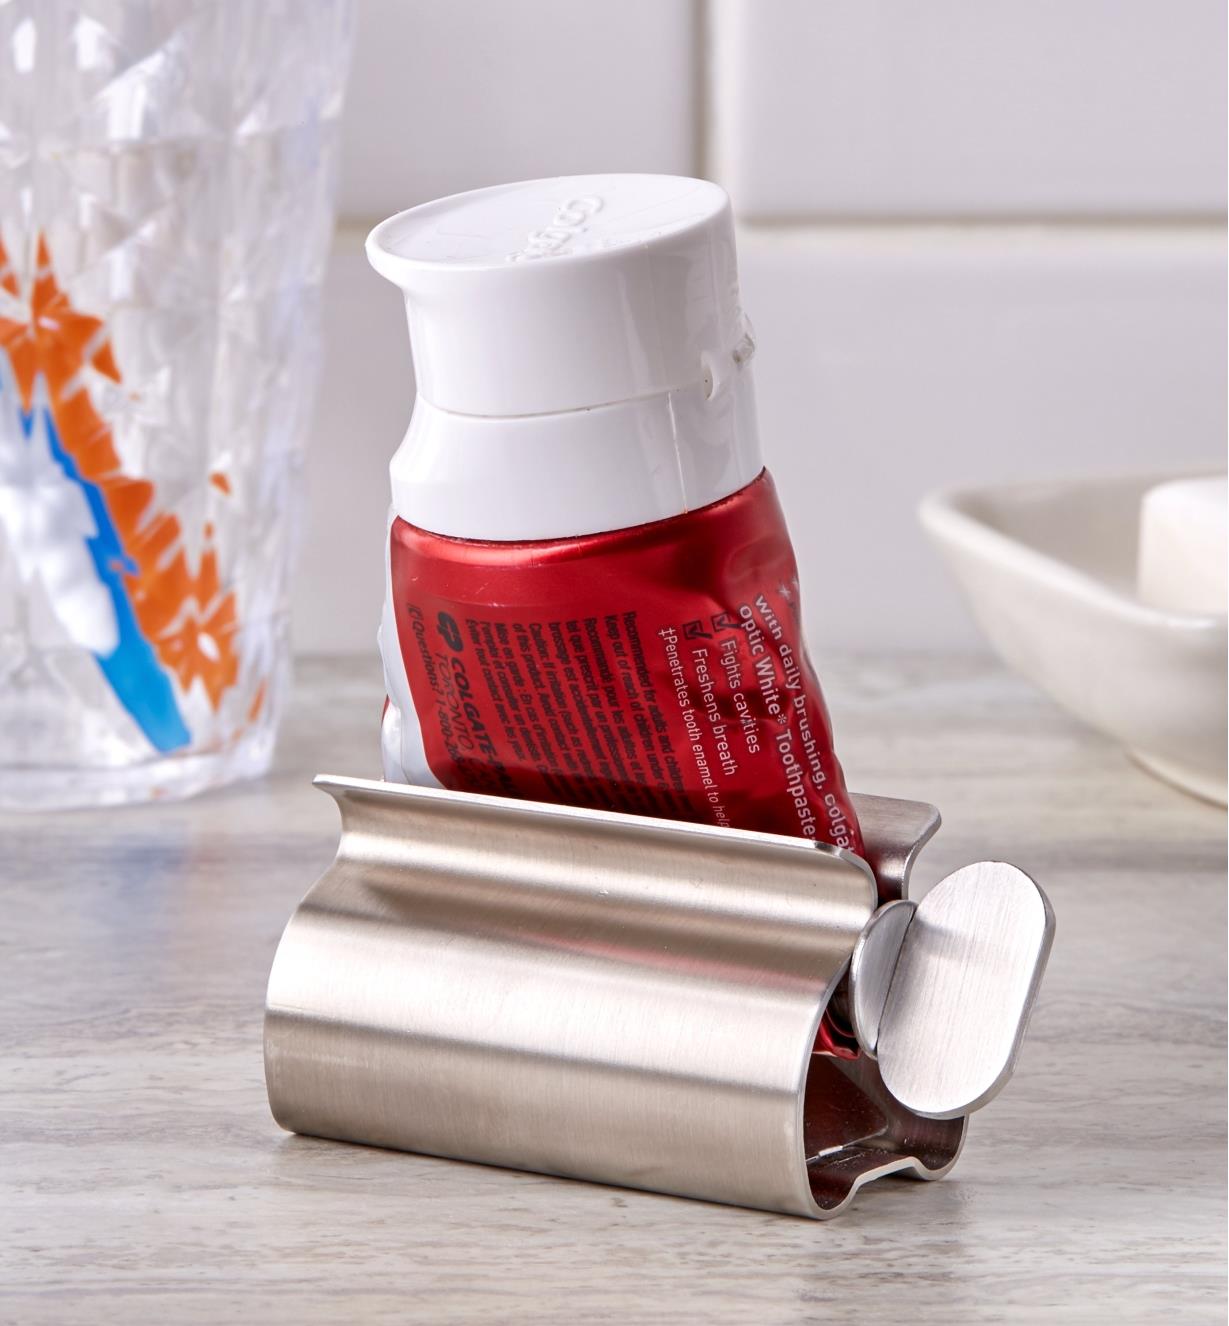 The tube squeezer holding a rolled-up tube sits on a bathroom counter